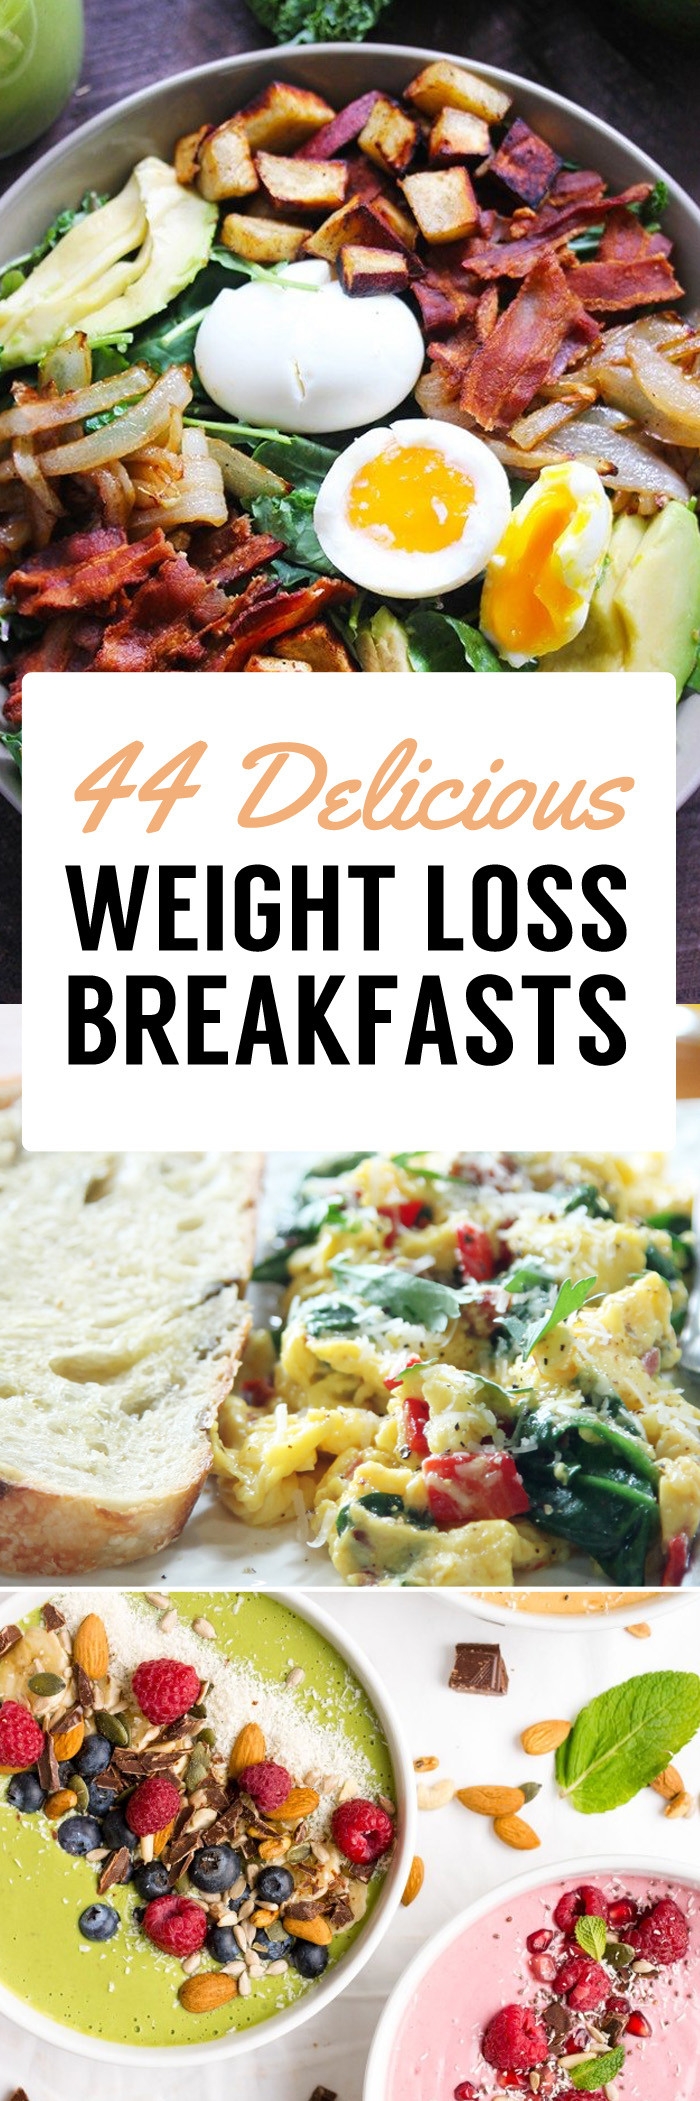 Weight Loss Dinners
 44 Weight Loss Breakfast Recipes To Jumpstart Your Fat